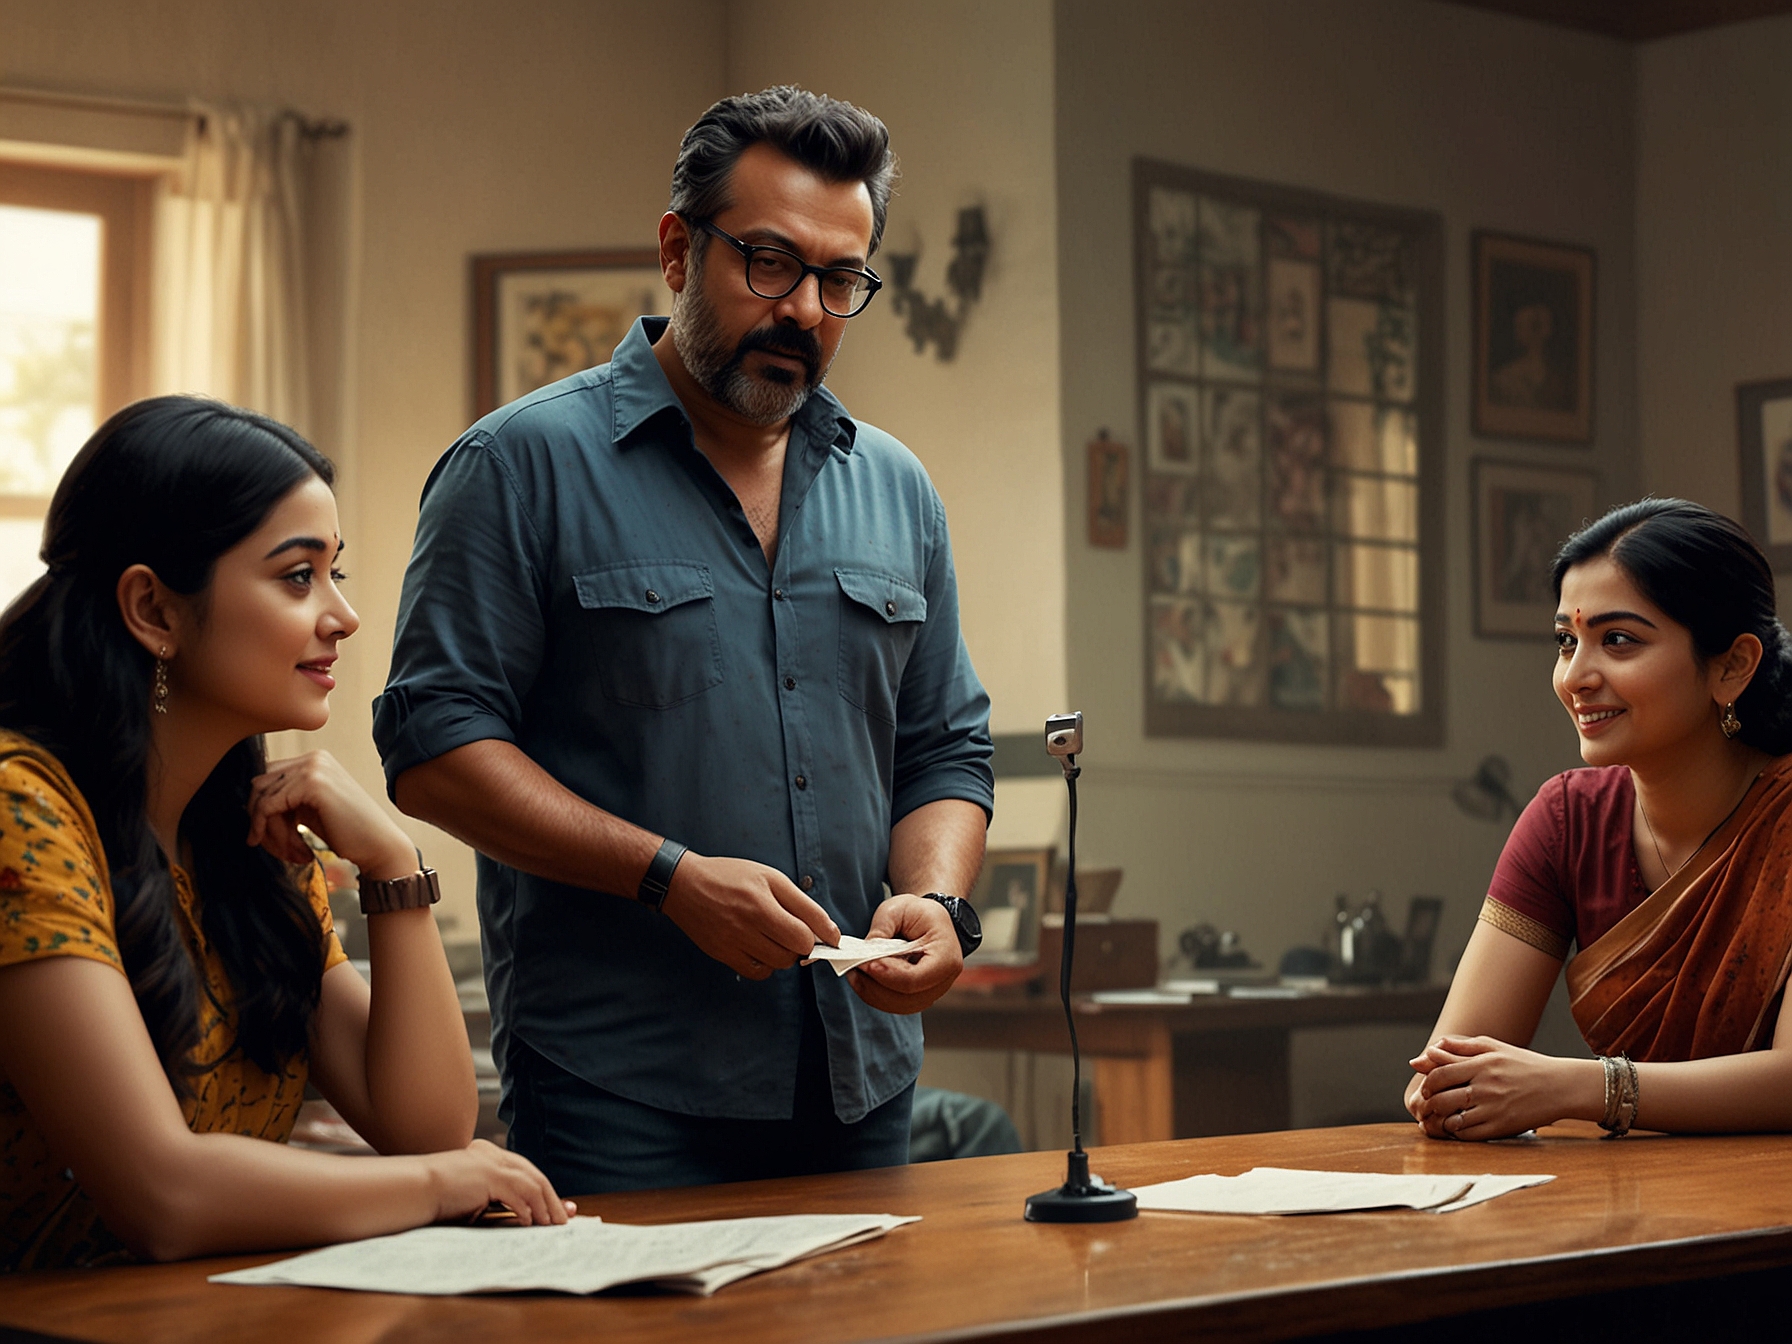 Director Anurag Kashyap discusses with the ensemble cast of 'Animal', including Bobby Deol, Anil Kapoor, Rashmika Mandanna, and Triptii Dimri, highlighting the movie's exploration of flawed humanity.